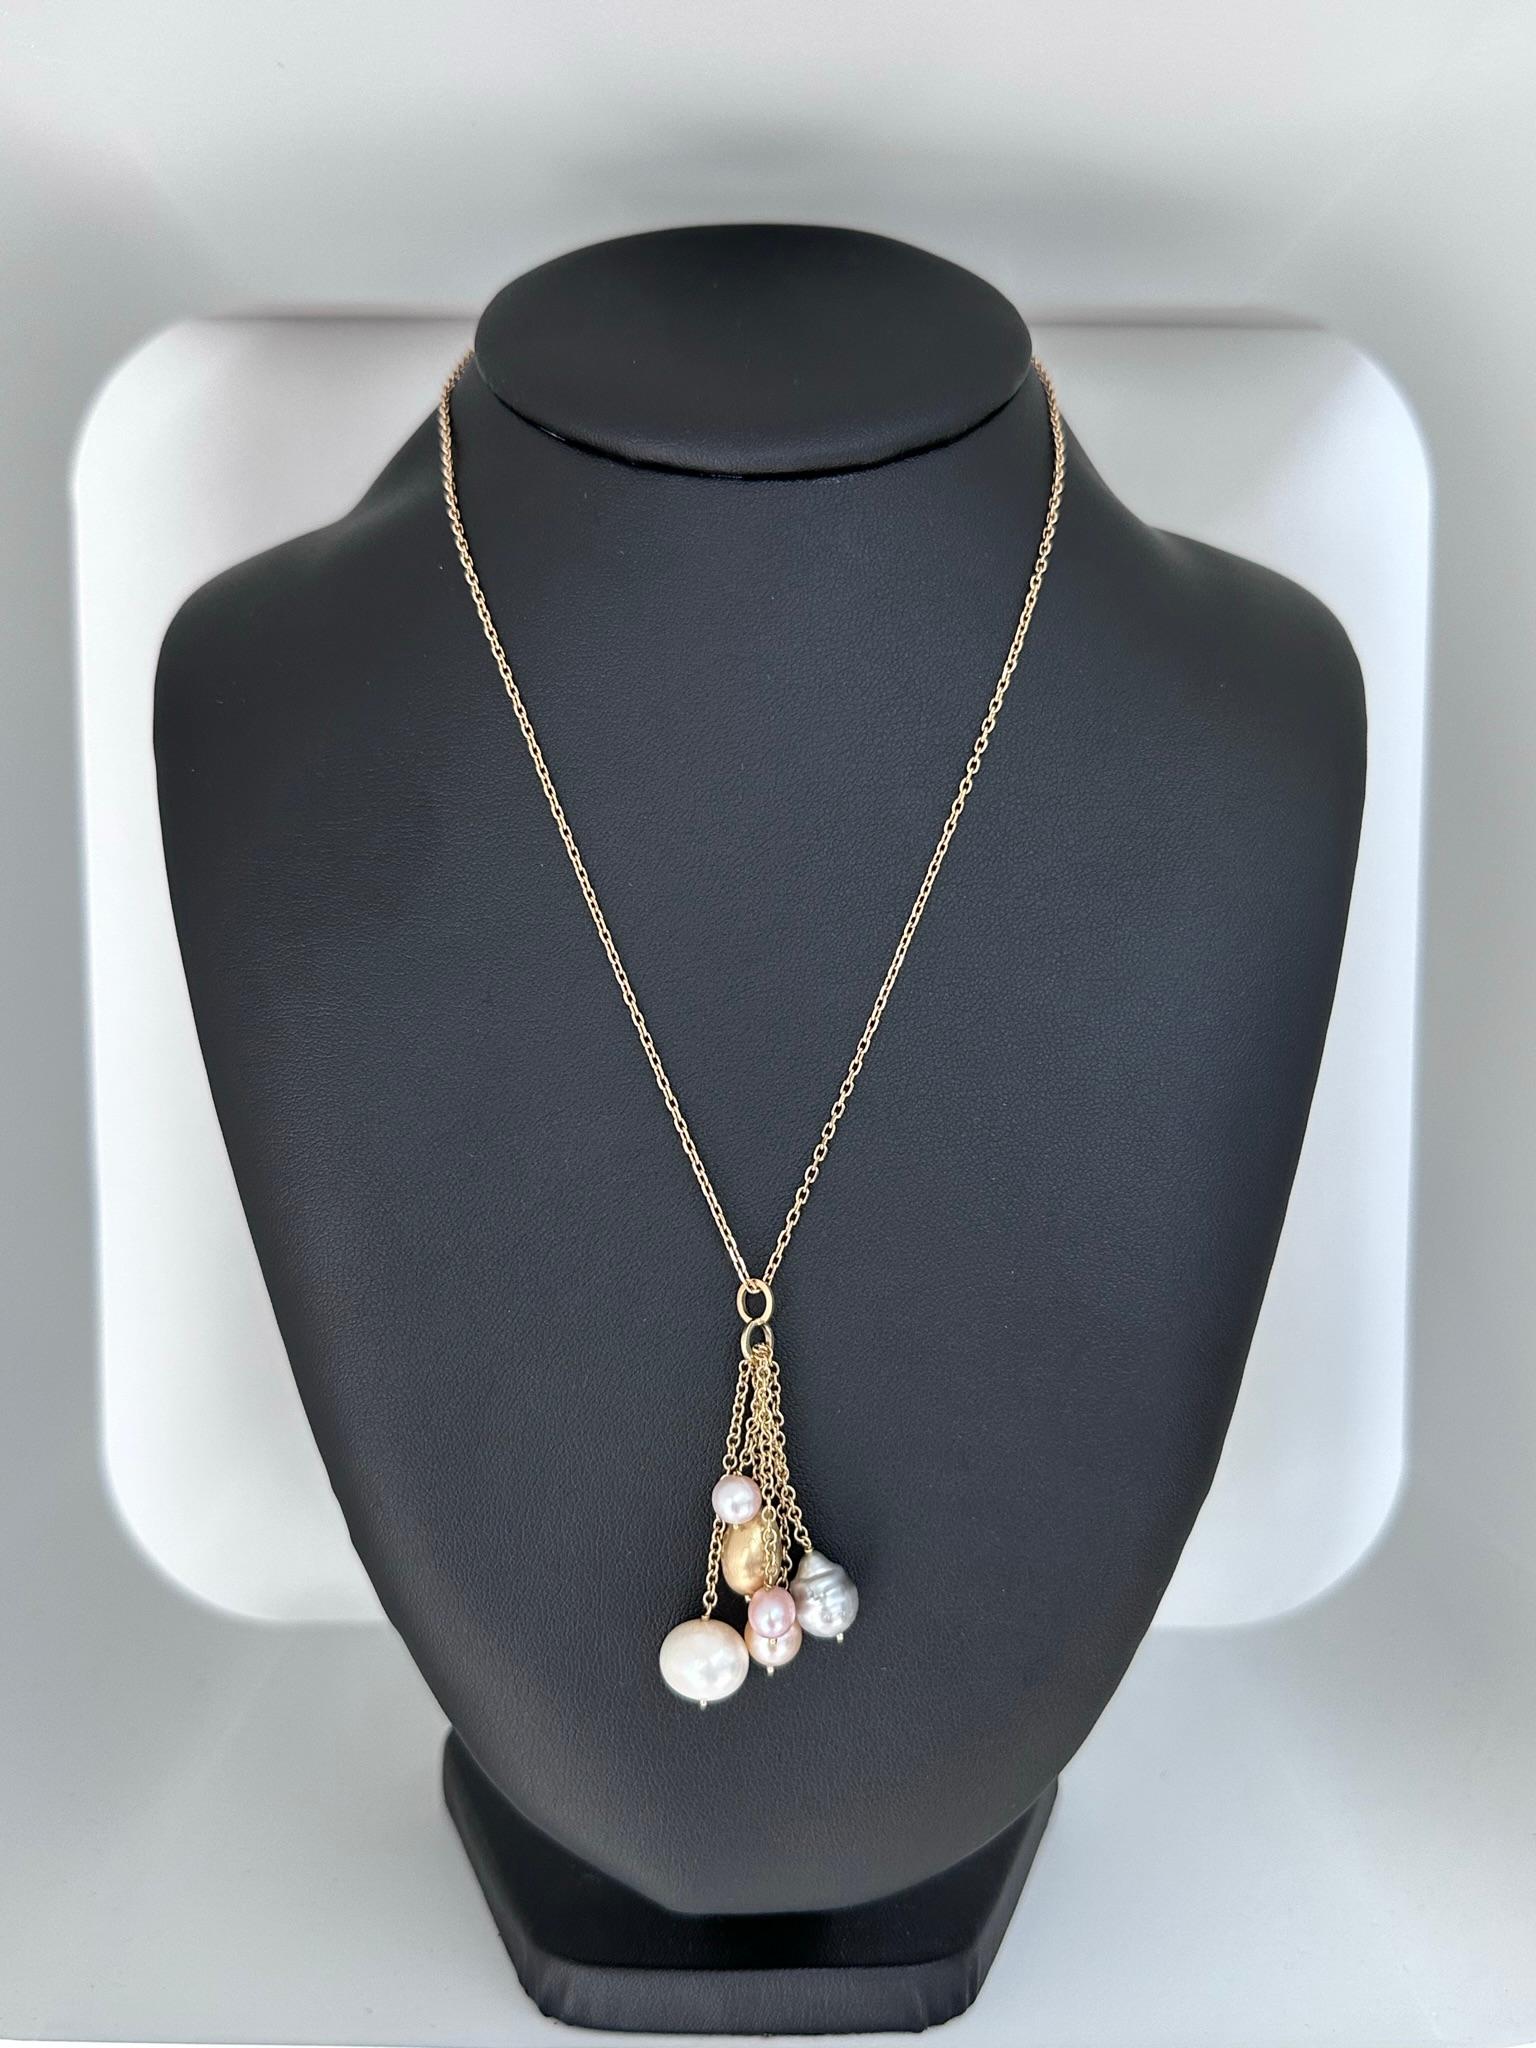 Italian Modern 18kt Yellow Gold Necklace with Pearls In Good Condition For Sale In Esch sur Alzette, Esch-sur-Alzette